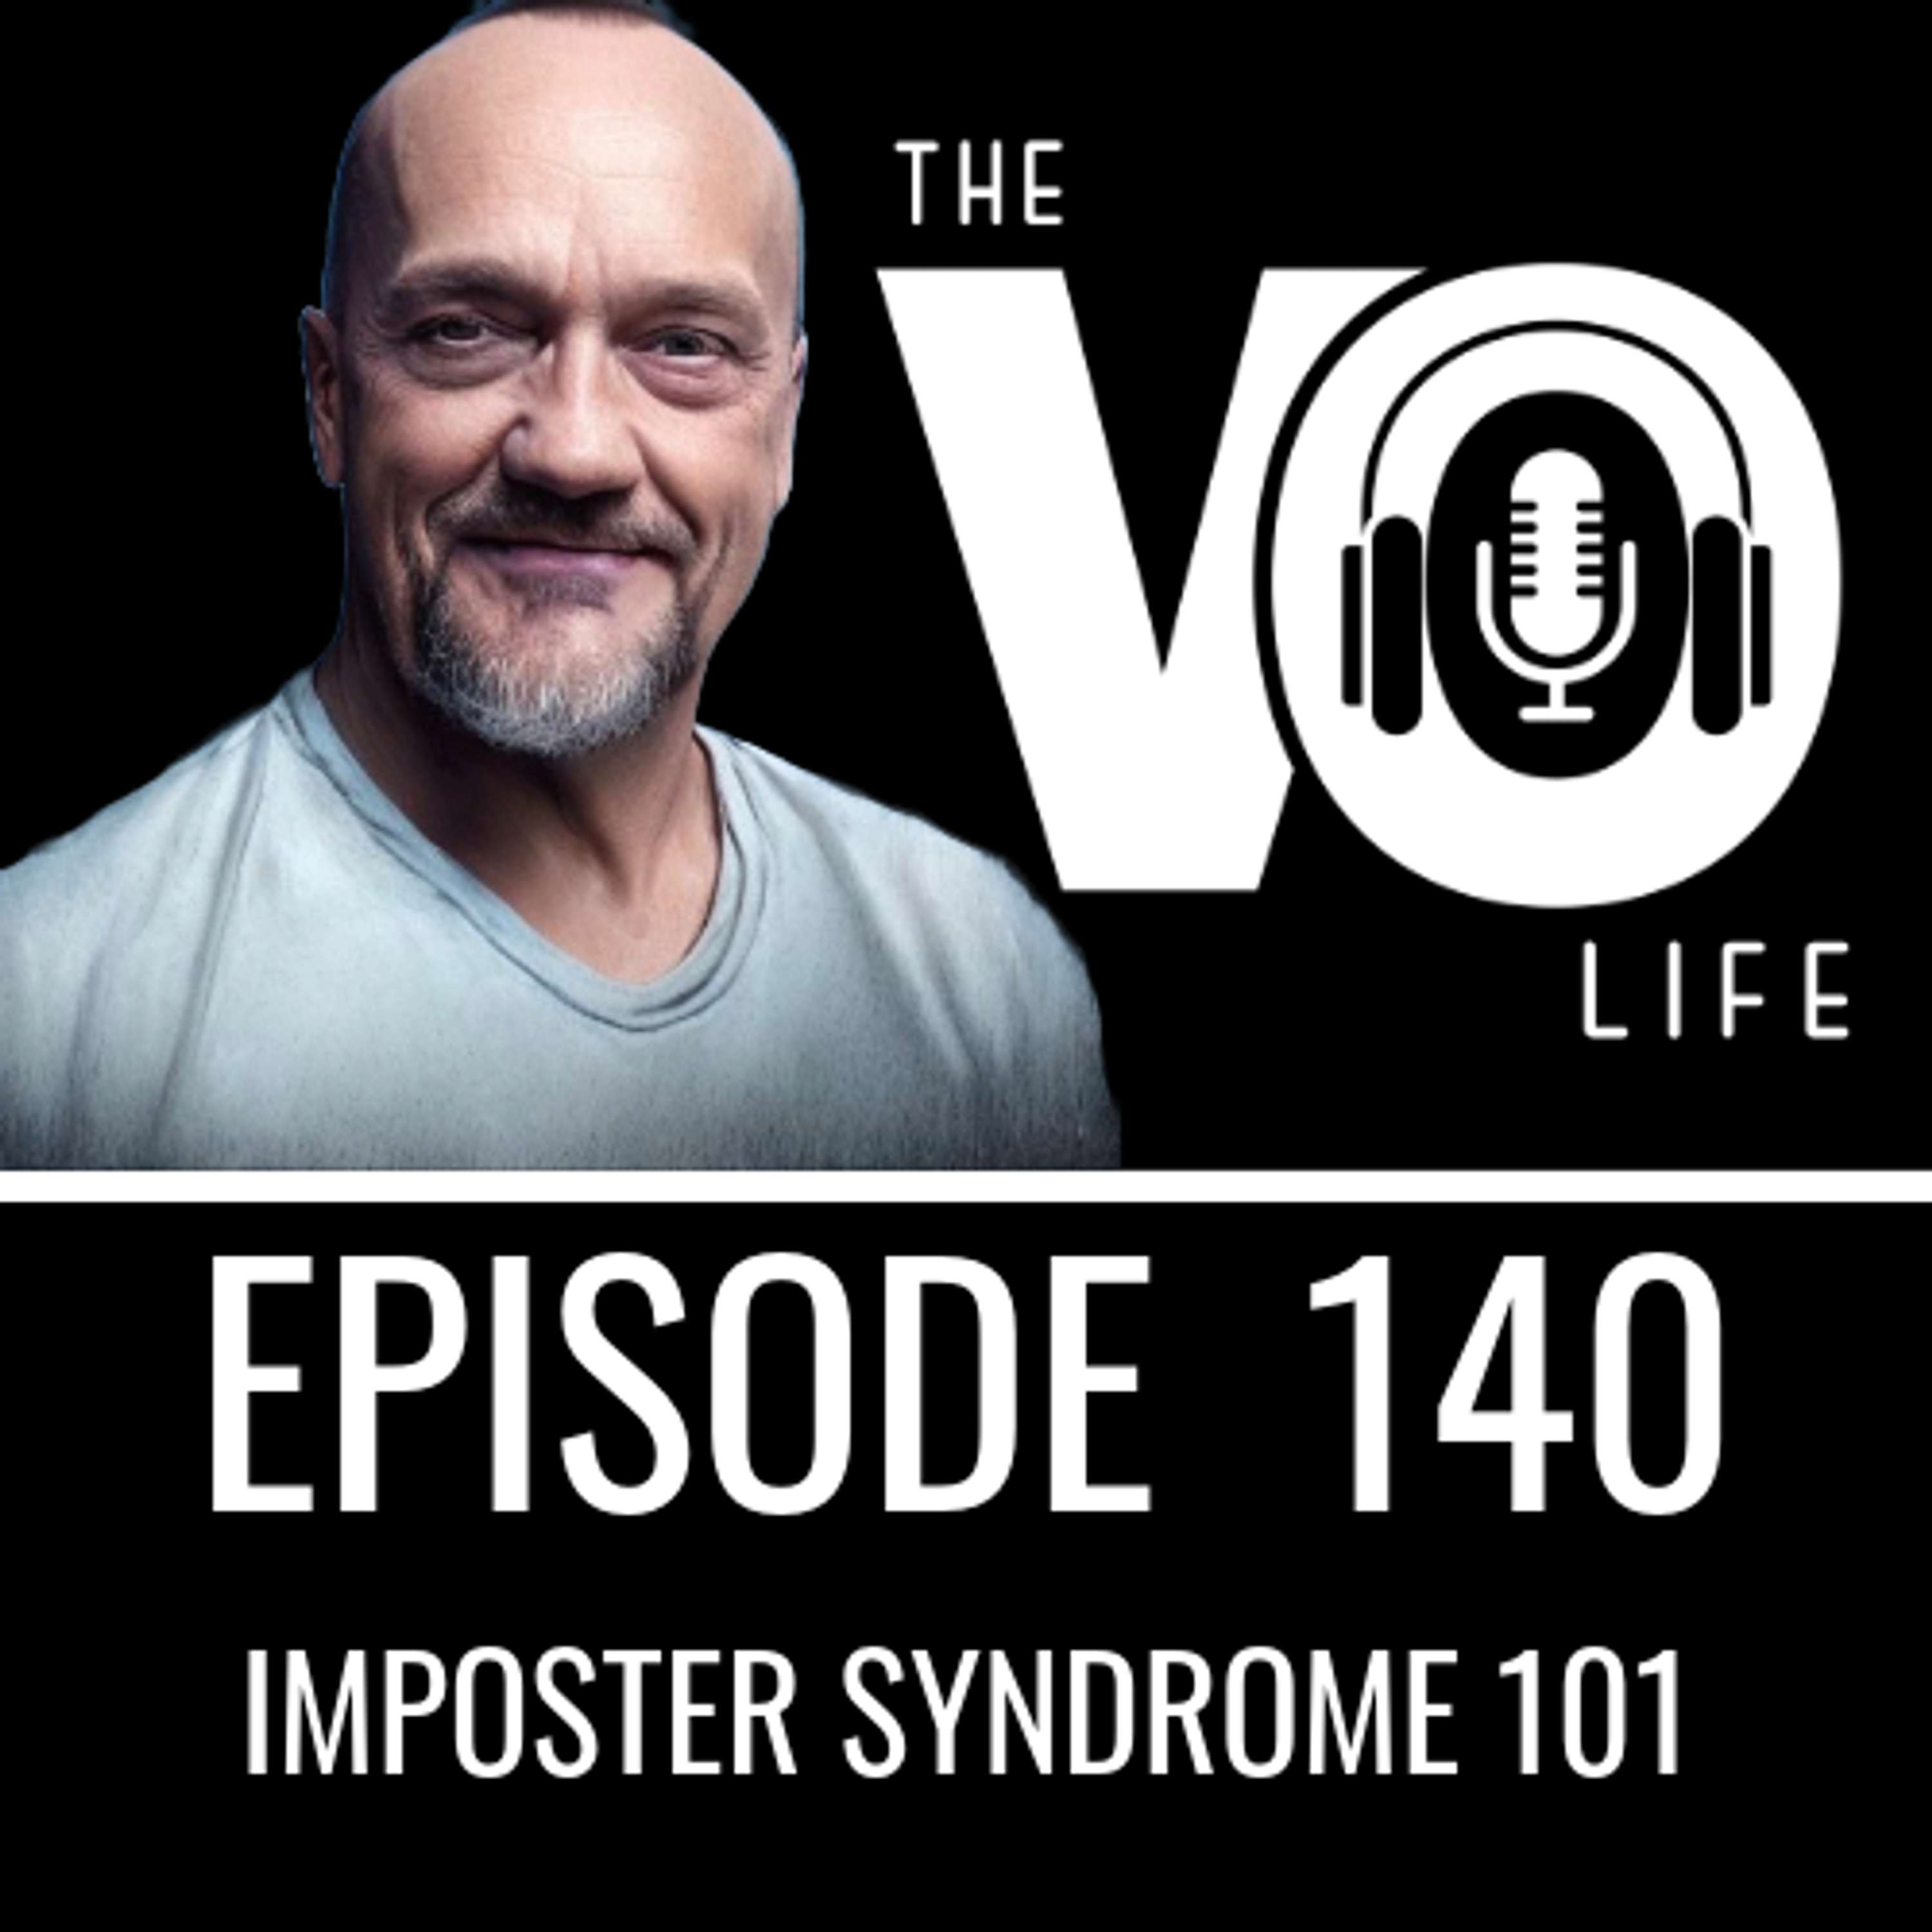 Ep 140 - Imposter Syndrome 101